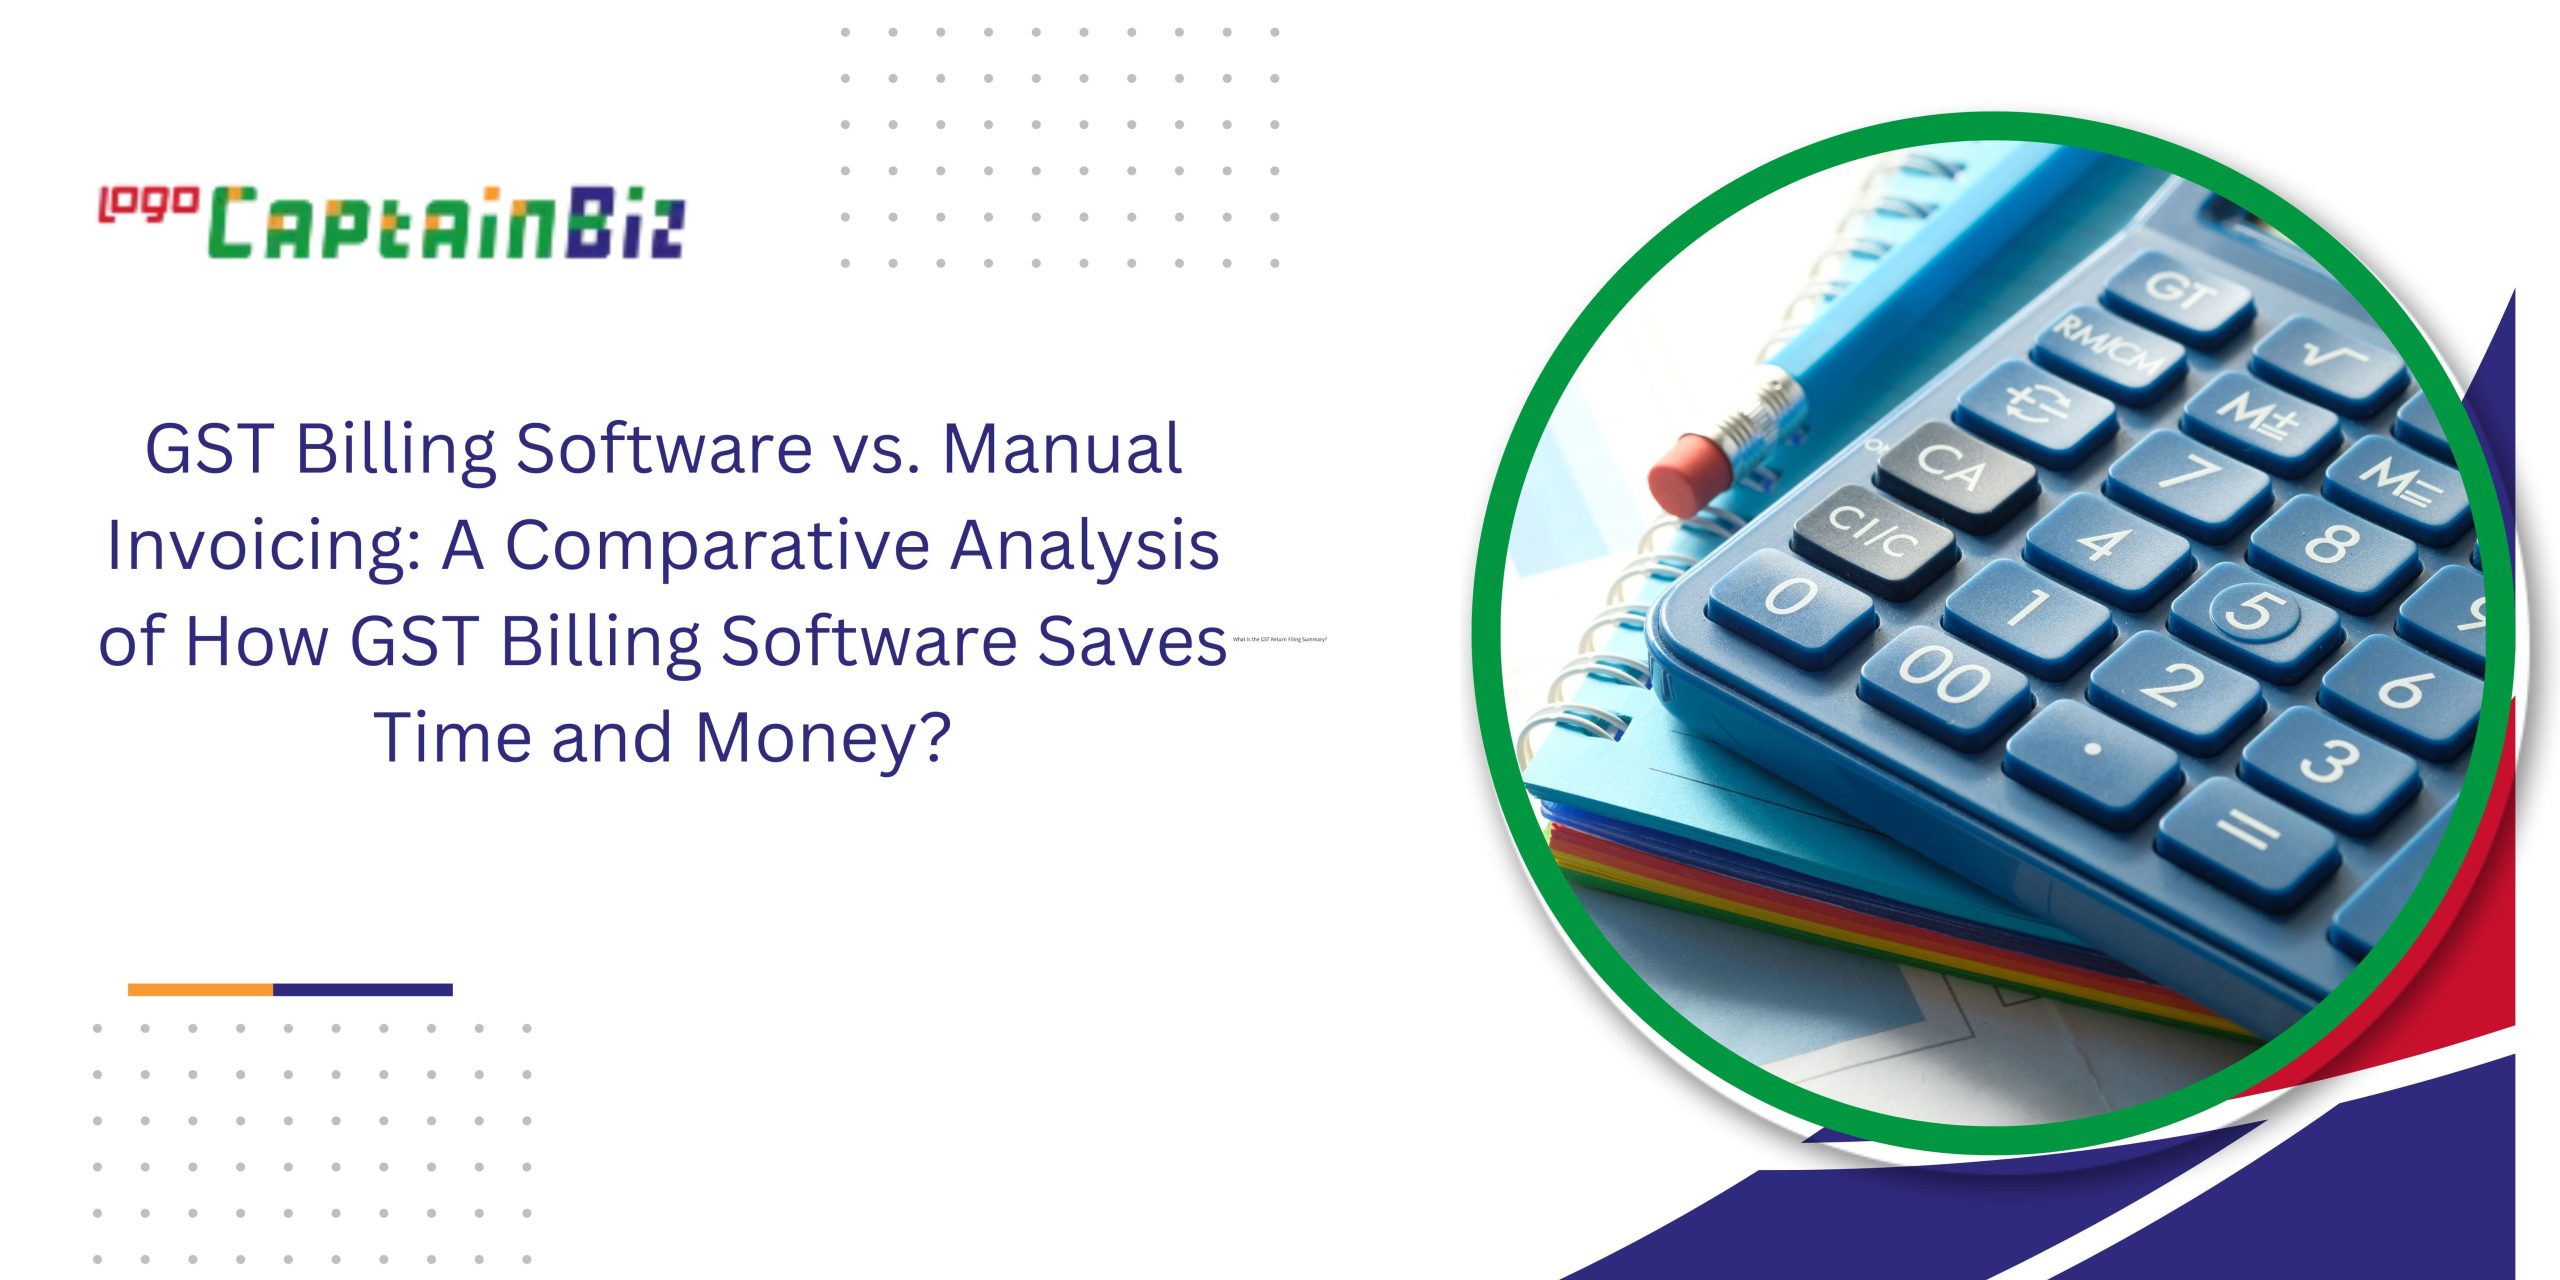 CaptainBiz: GST Billing Software vs. Manual Invoicing: A Comparative Analysis of How GST Billing Software Saves Time and Money?